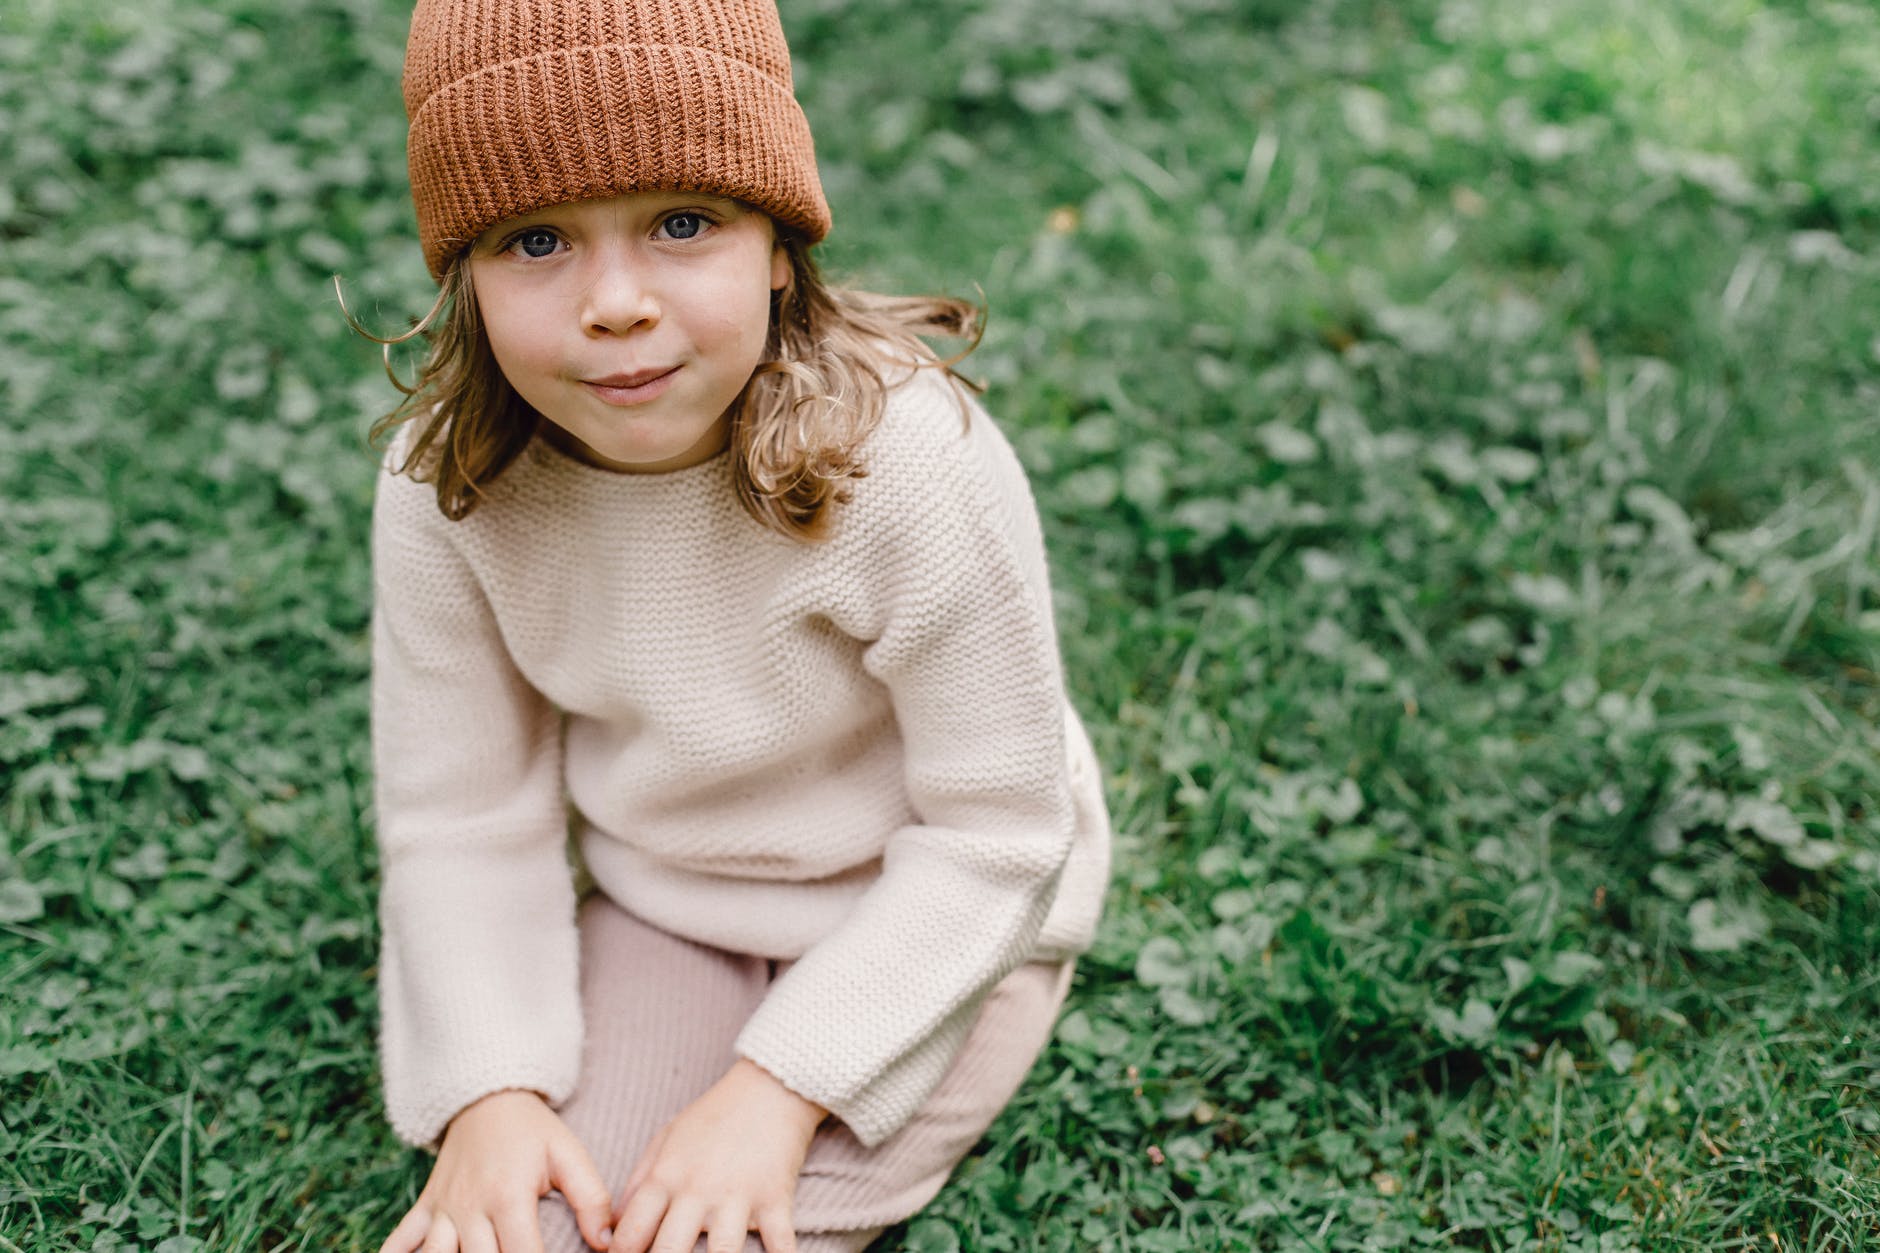 Fiona was making something in the backyard. | Source: Pexels